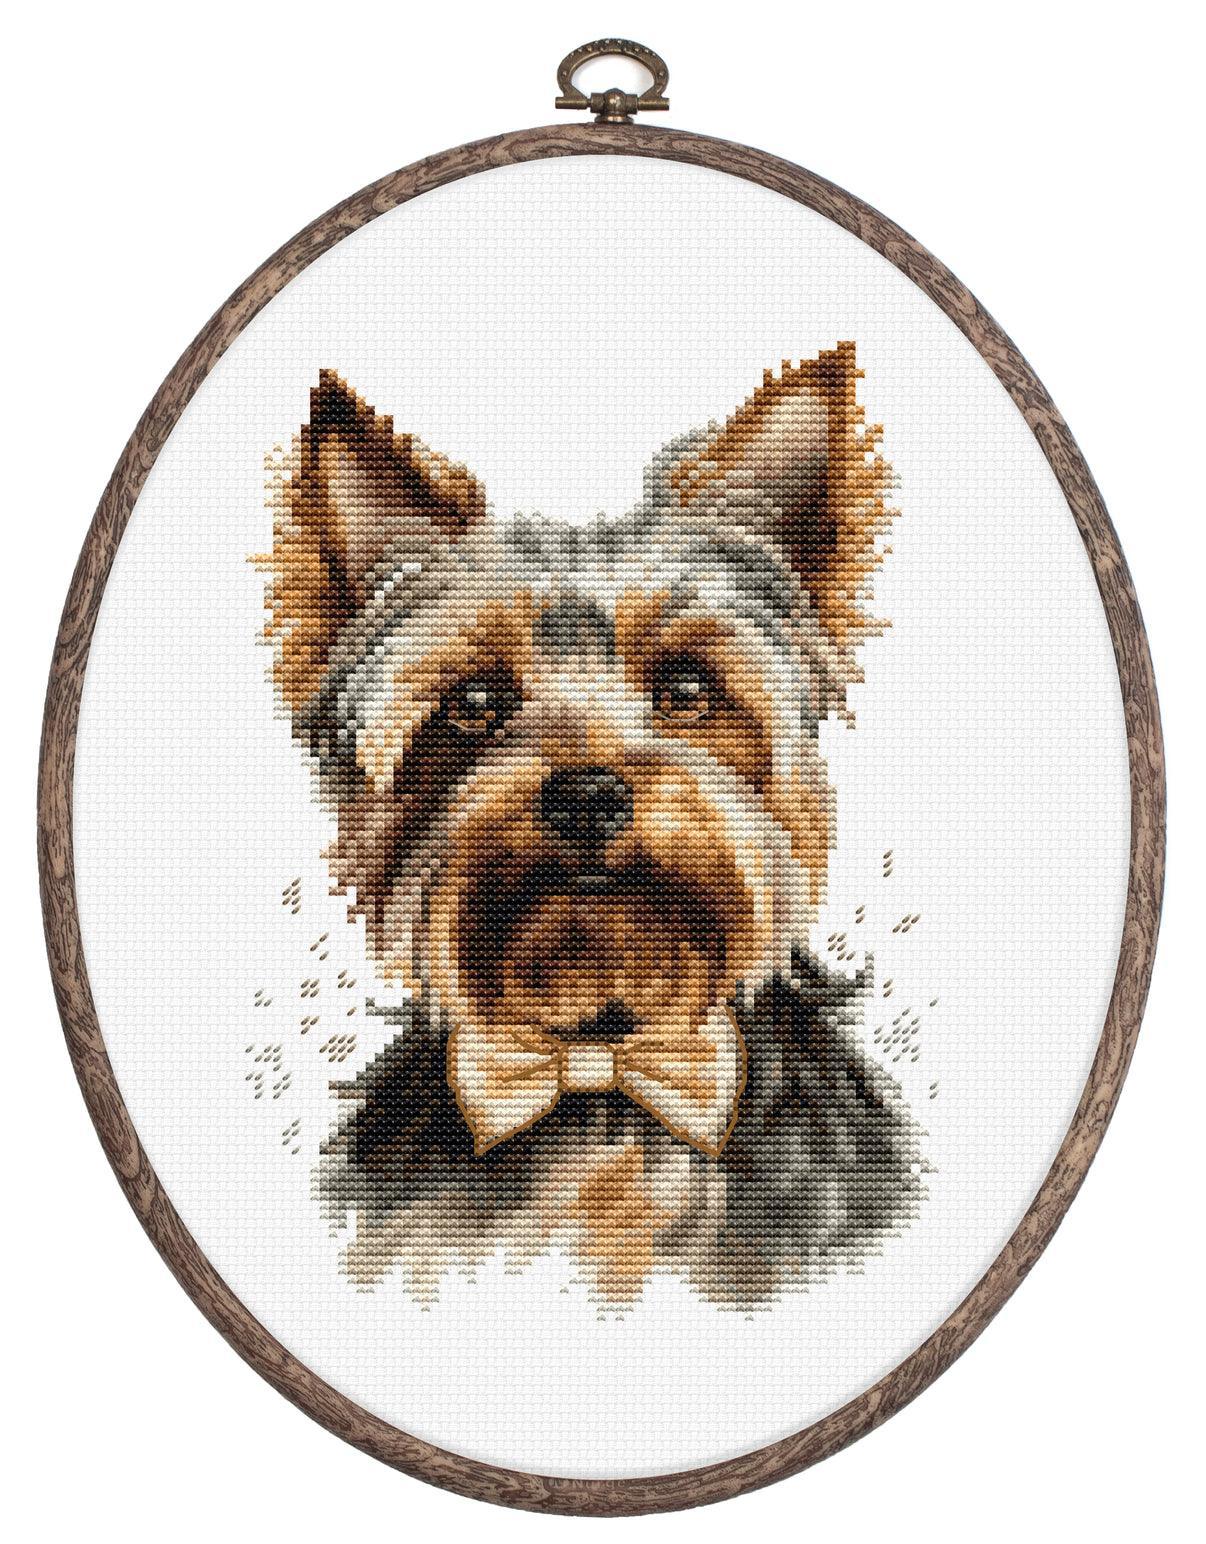 Cross Stitch Kit with Hoop Included Luca-S - The Yorkshire Terrier, BC228 Cross Stitch Kits - HobbyJobby